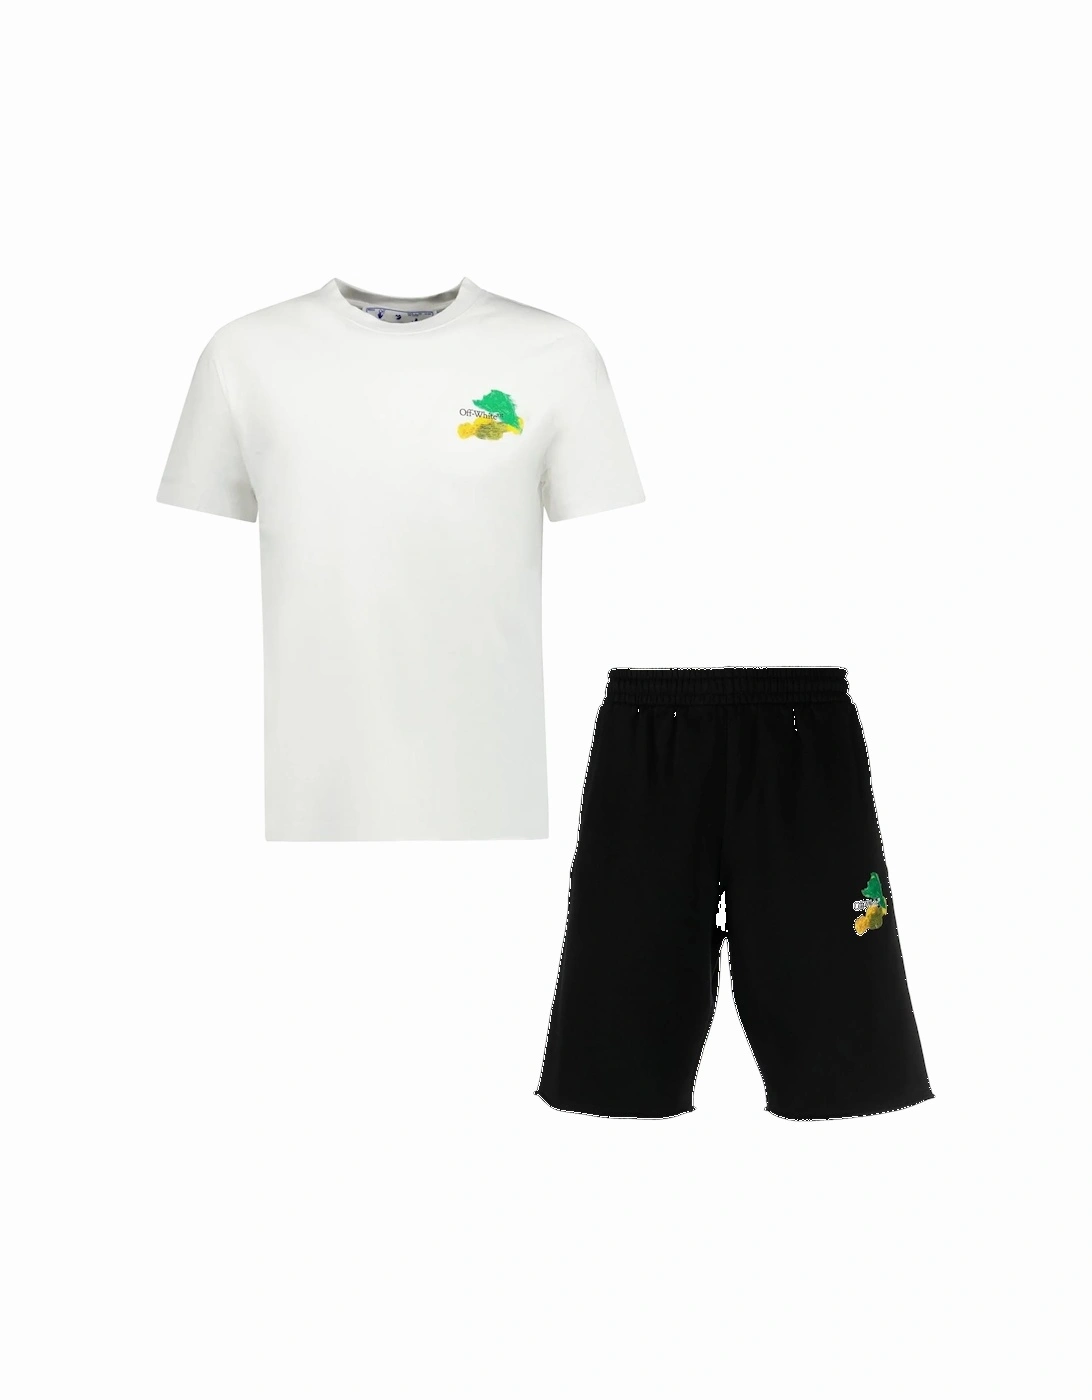 Brush Arrows T-Shirt & Shorts Set in White and Black